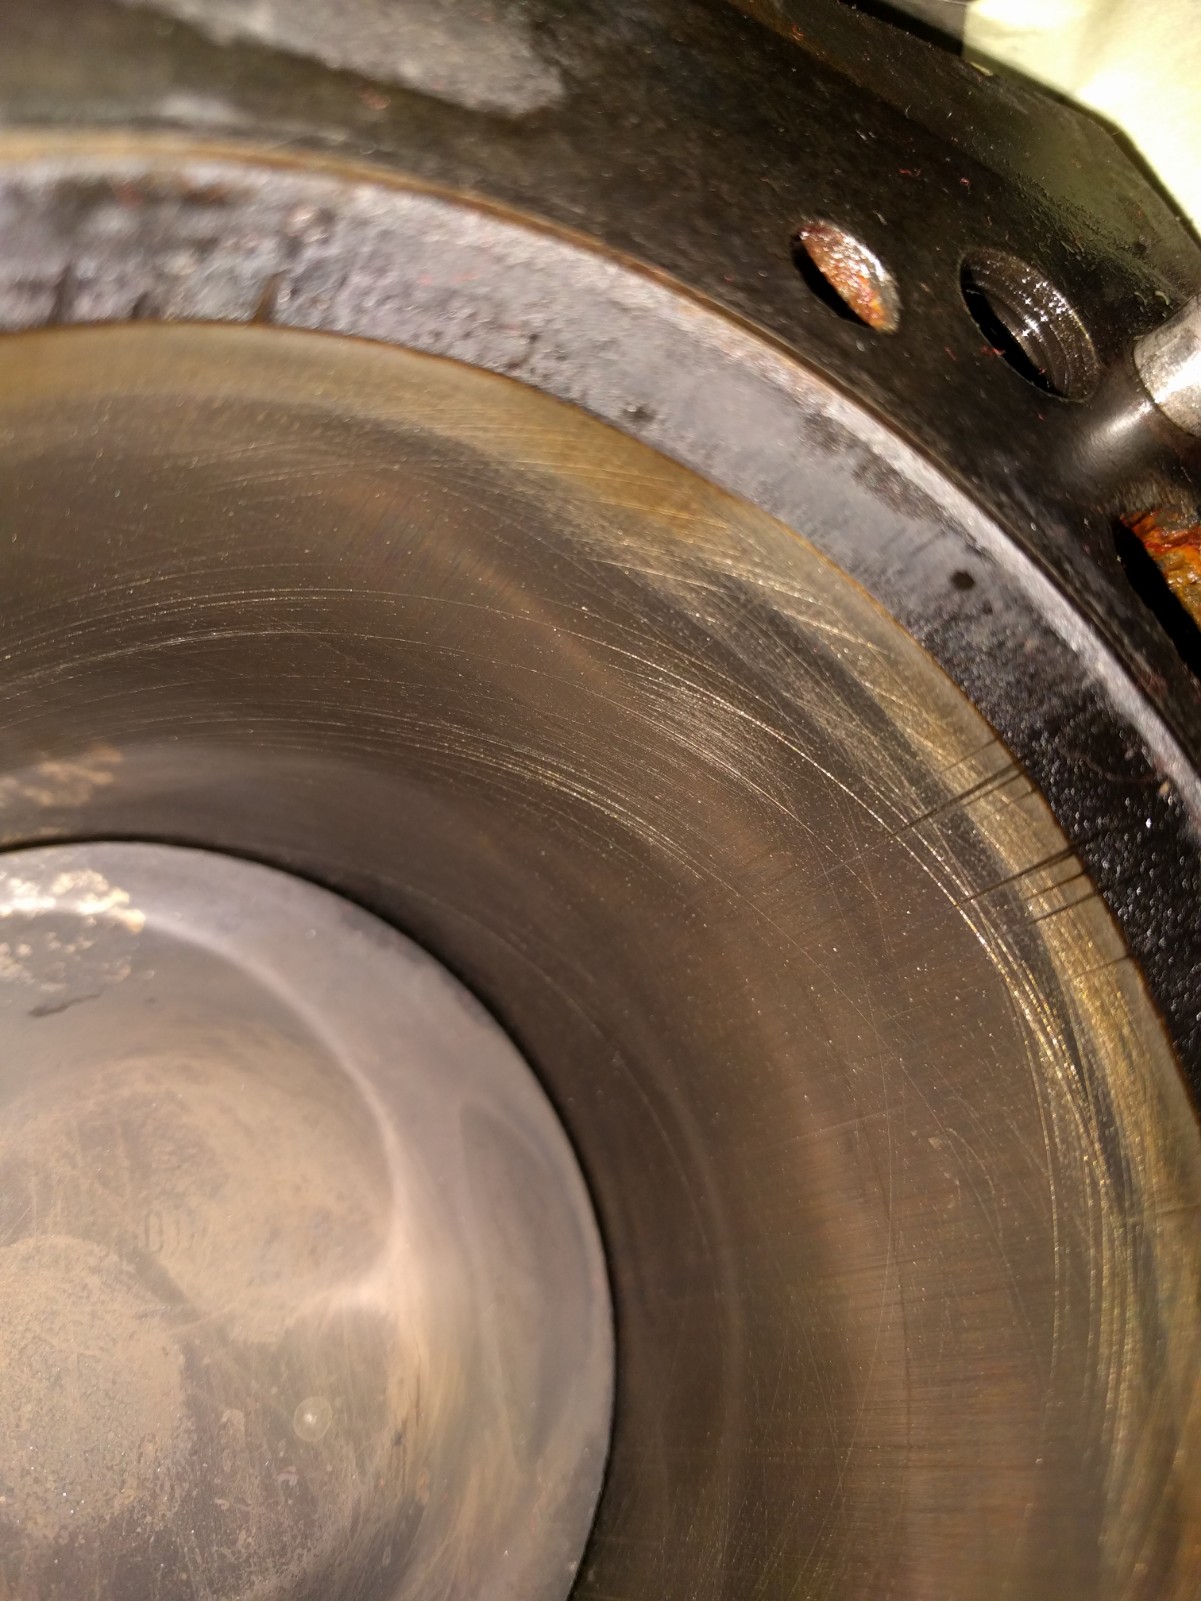 Cylinder bore has no deep scratches and some cross-hatching left.